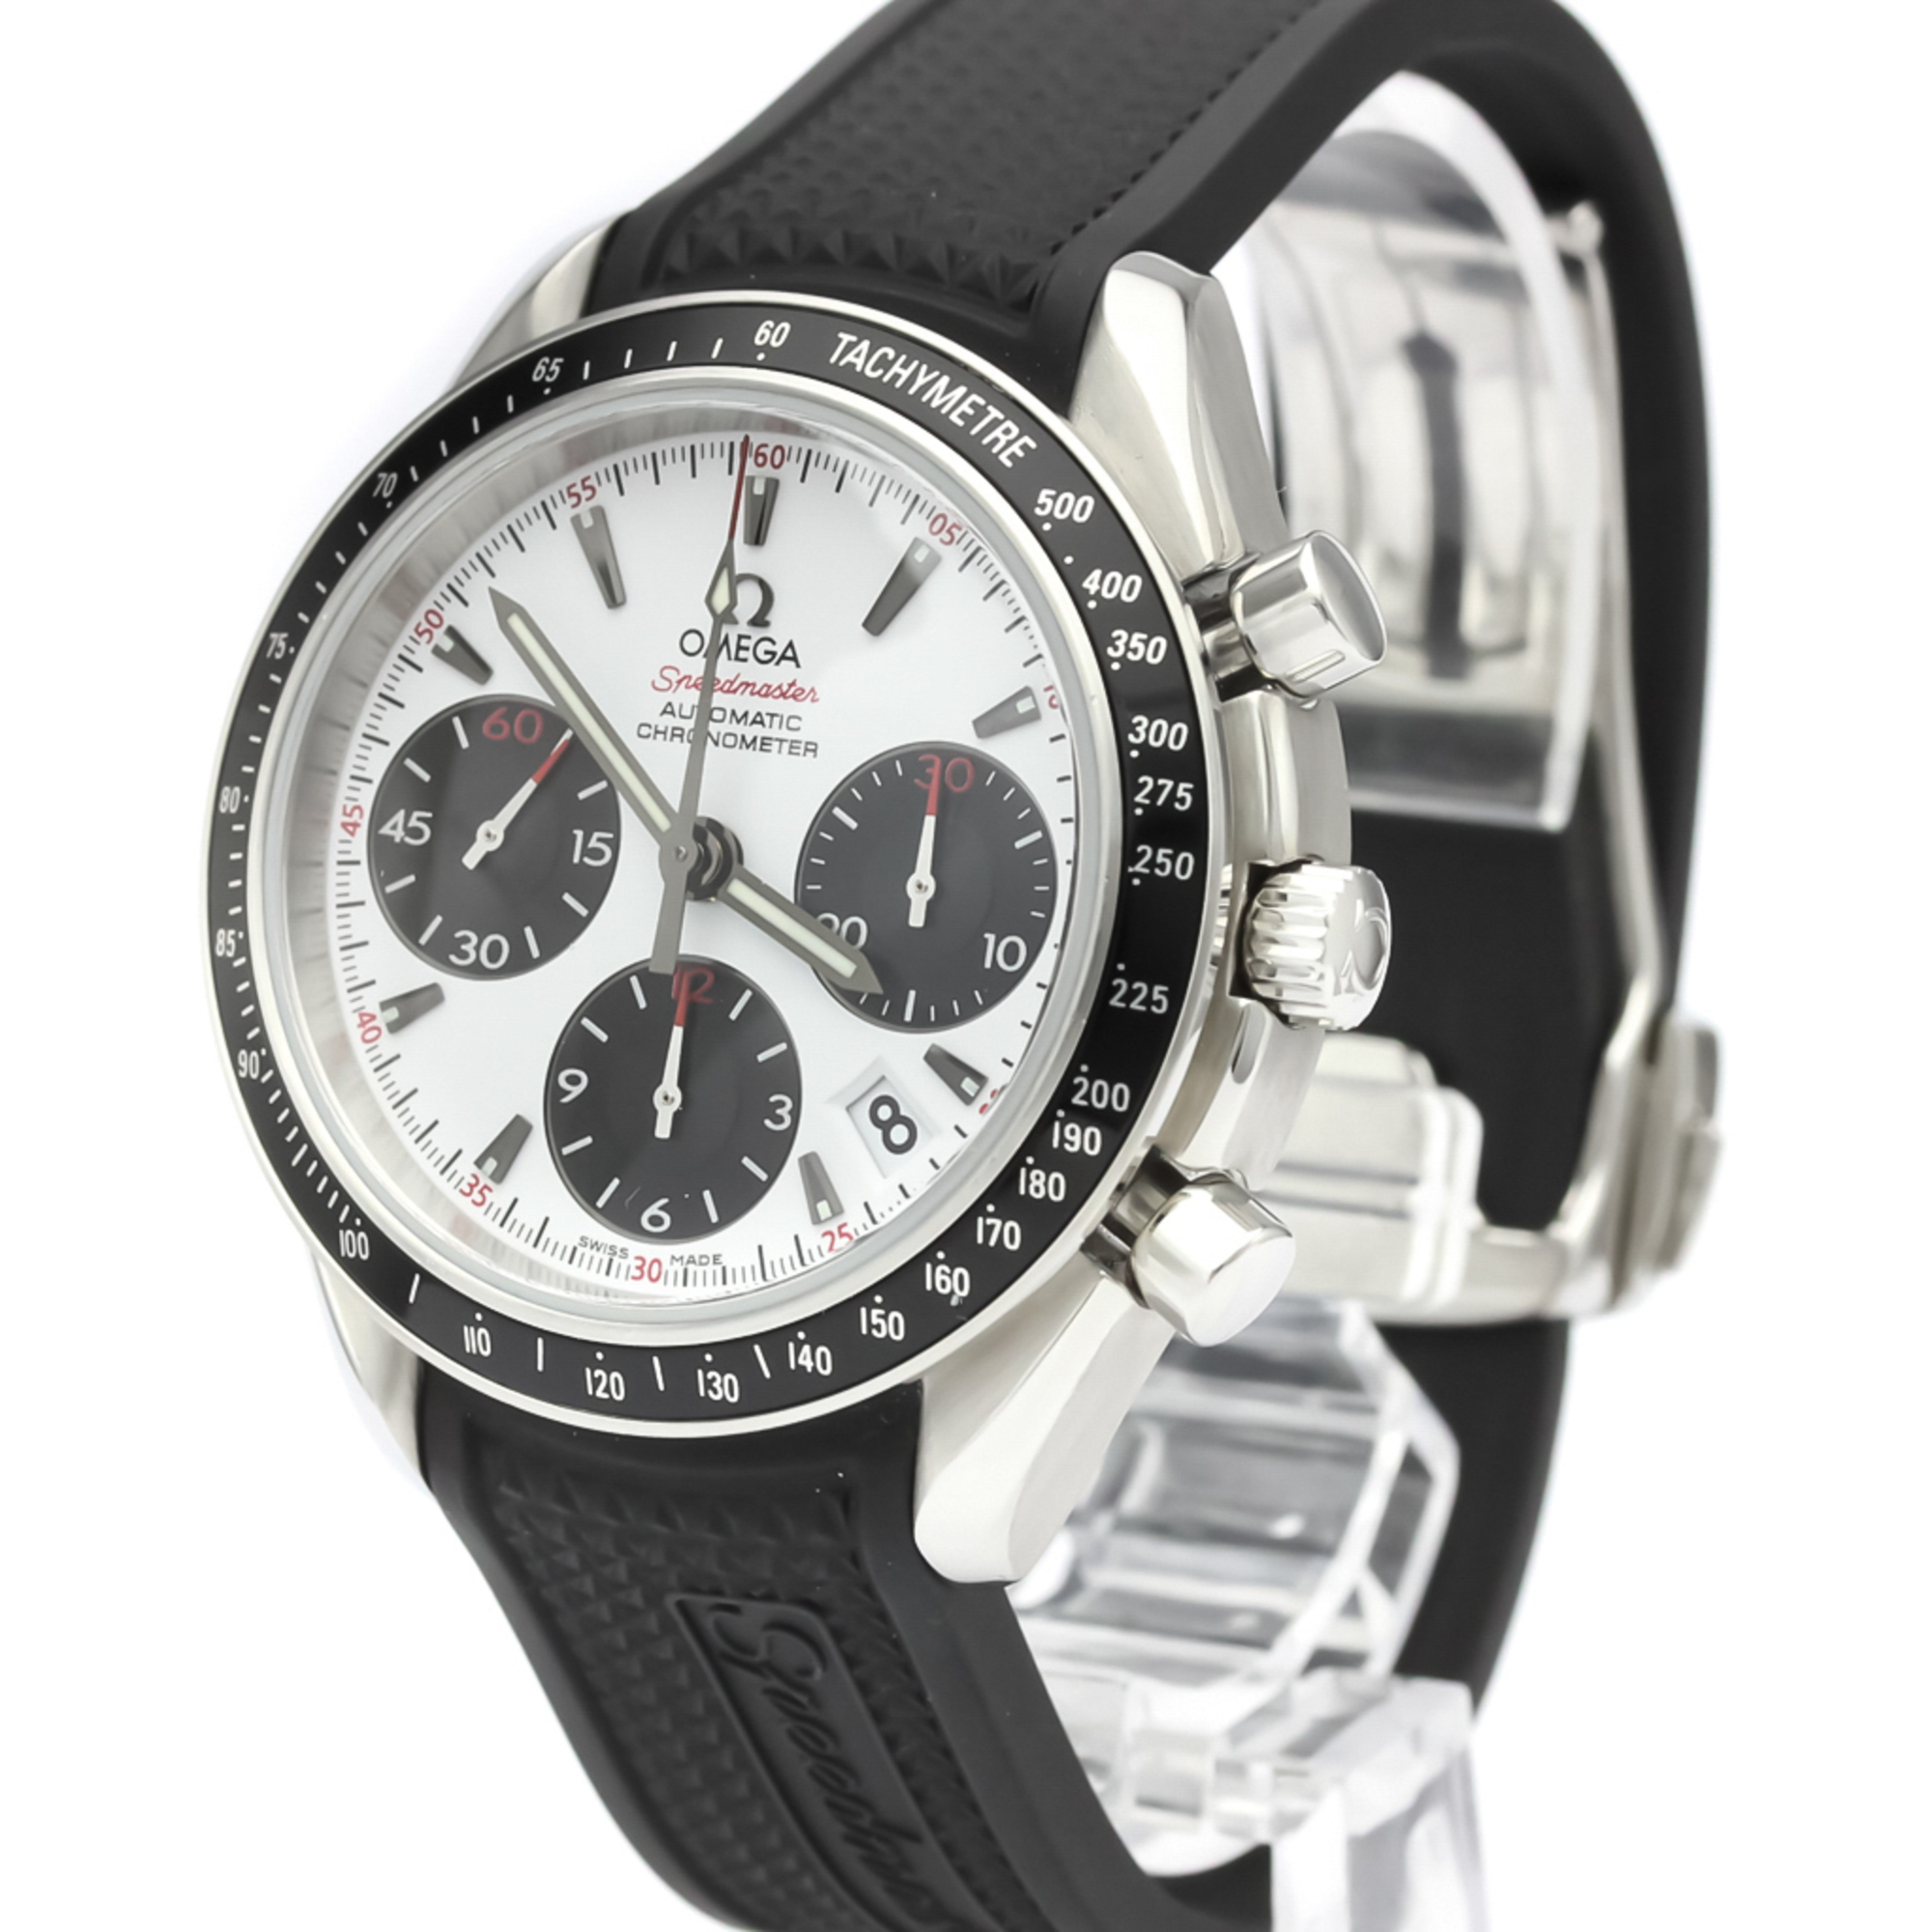 Omega Speedmaster Automatic Stainless Steel Men's Sports Watch 323.32.40.40.04.001